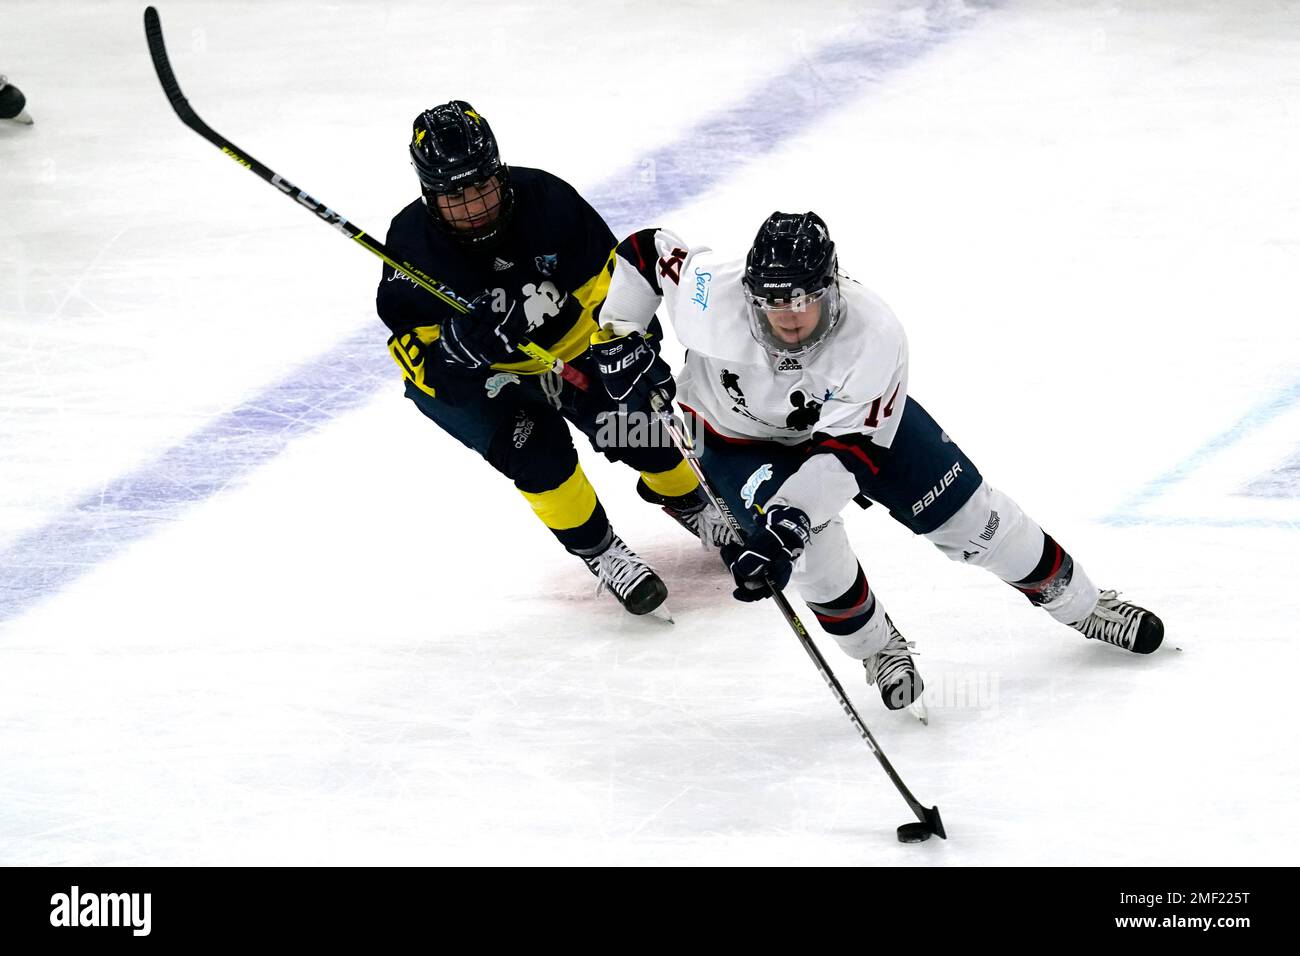 Women's Sports Foundation New Hampshire's Hayley Scamurra, right, controls  the puck against Team Adidas Minnesota's Abby Roque during the second  period of the Dream Gap Tour women's hockey game at the United